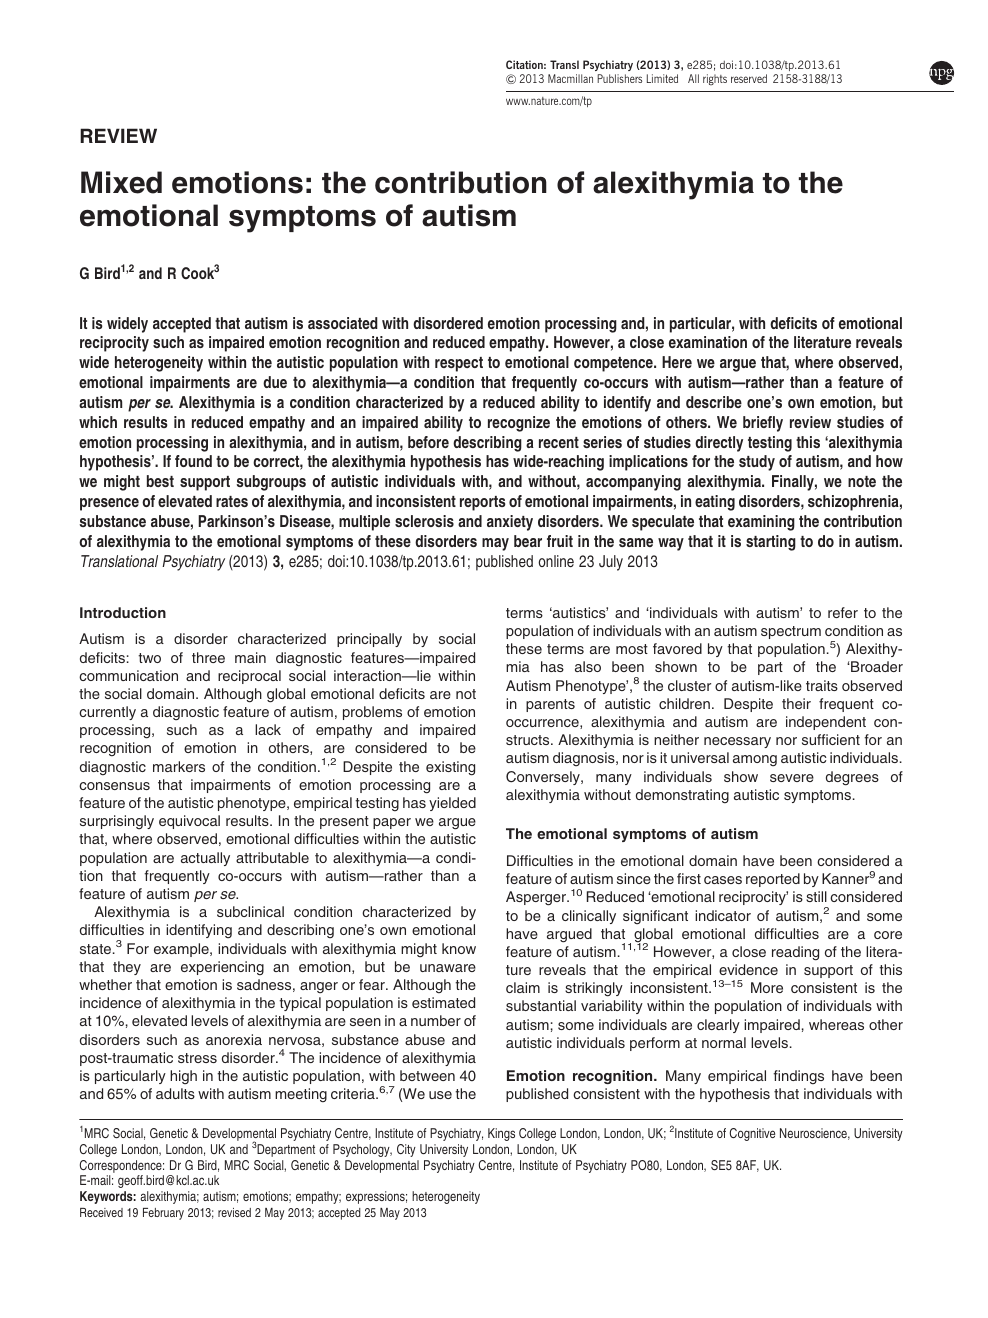 Mixed Emotions The Contribution Of Alexithymia To The Emotional Symptoms Of Autism Topic Of Research Paper In Clinical Medicine Download Scholarly Article Pdf And Read For Free On Cyberleninka Open Science